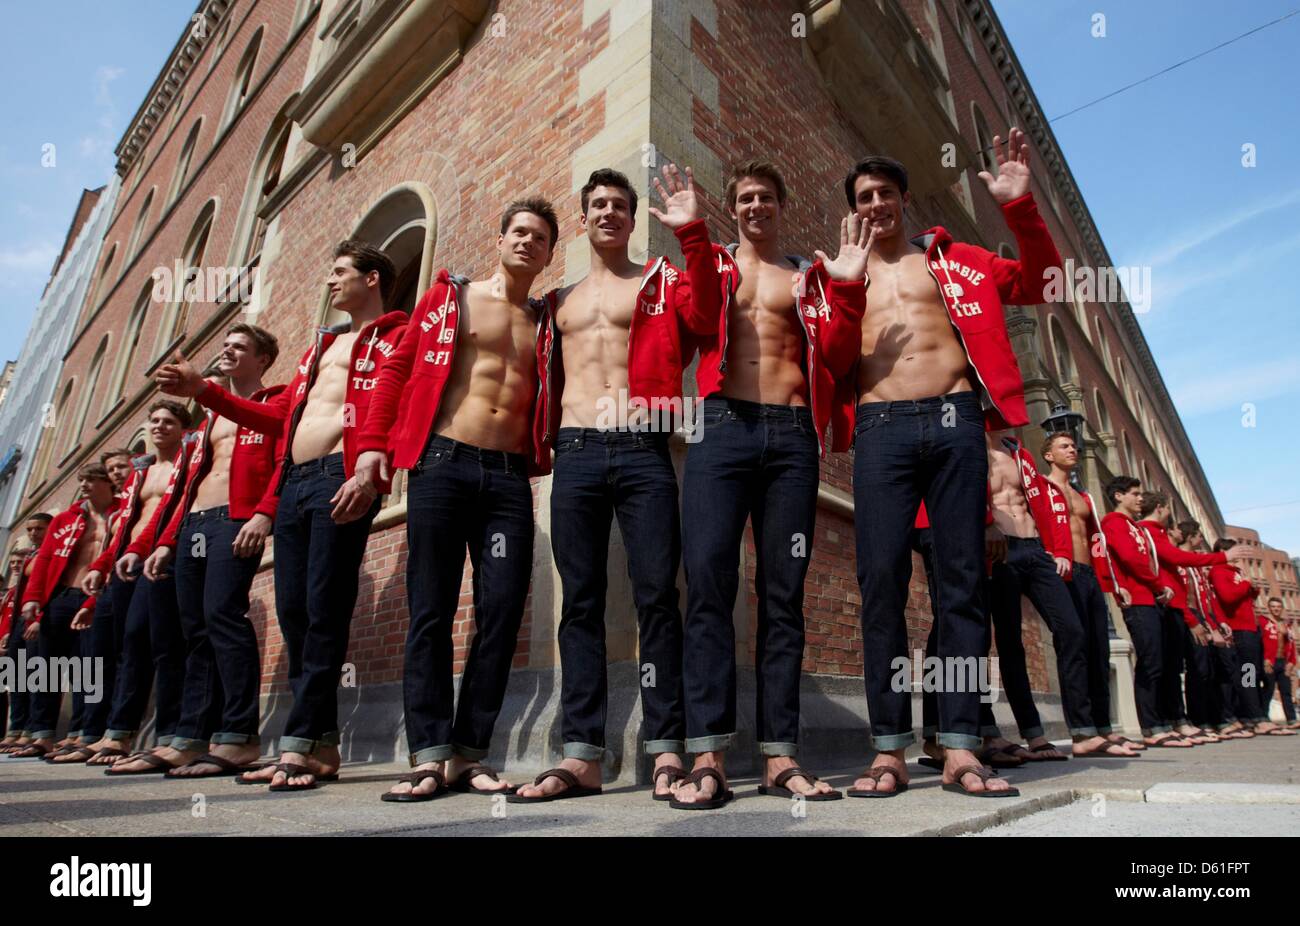 abercrombie & fitch germany